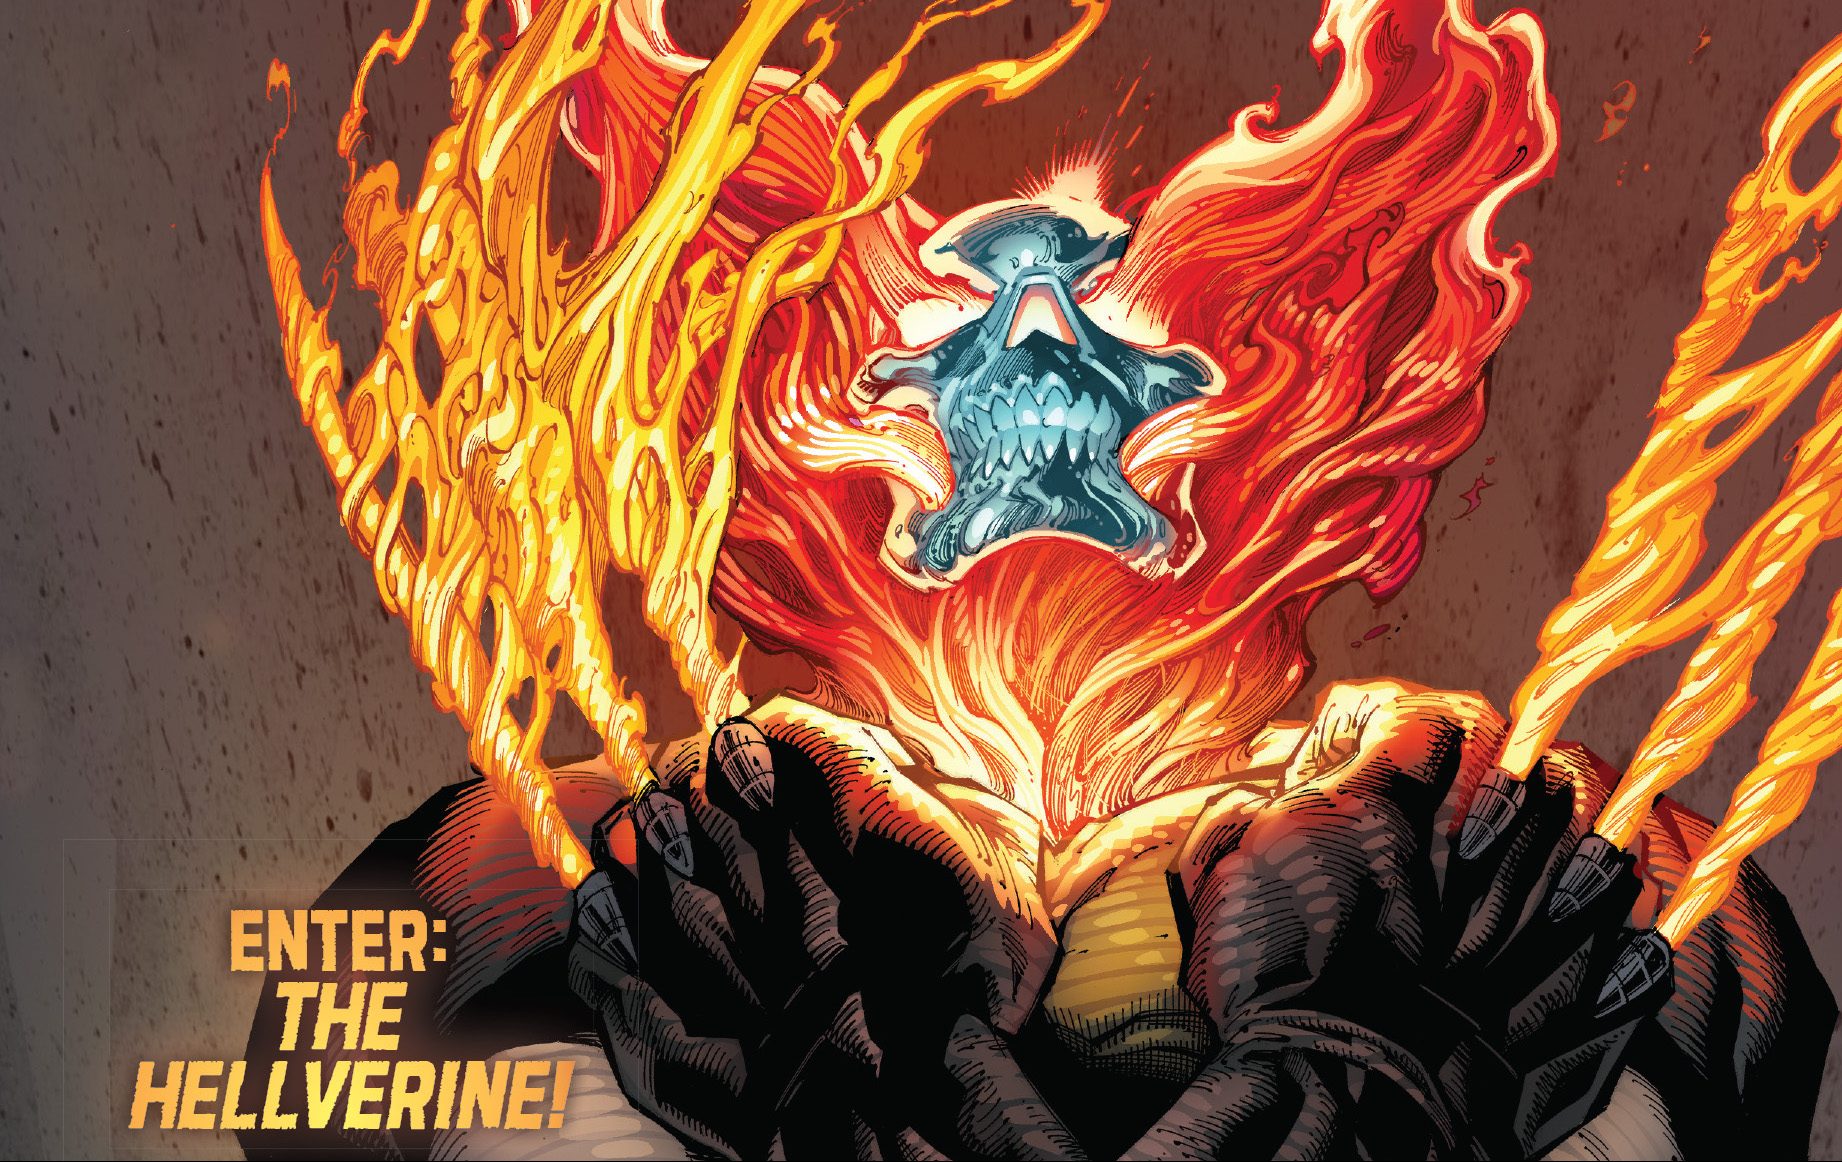 'Wolverine' #36 review: Enter the Hellverine